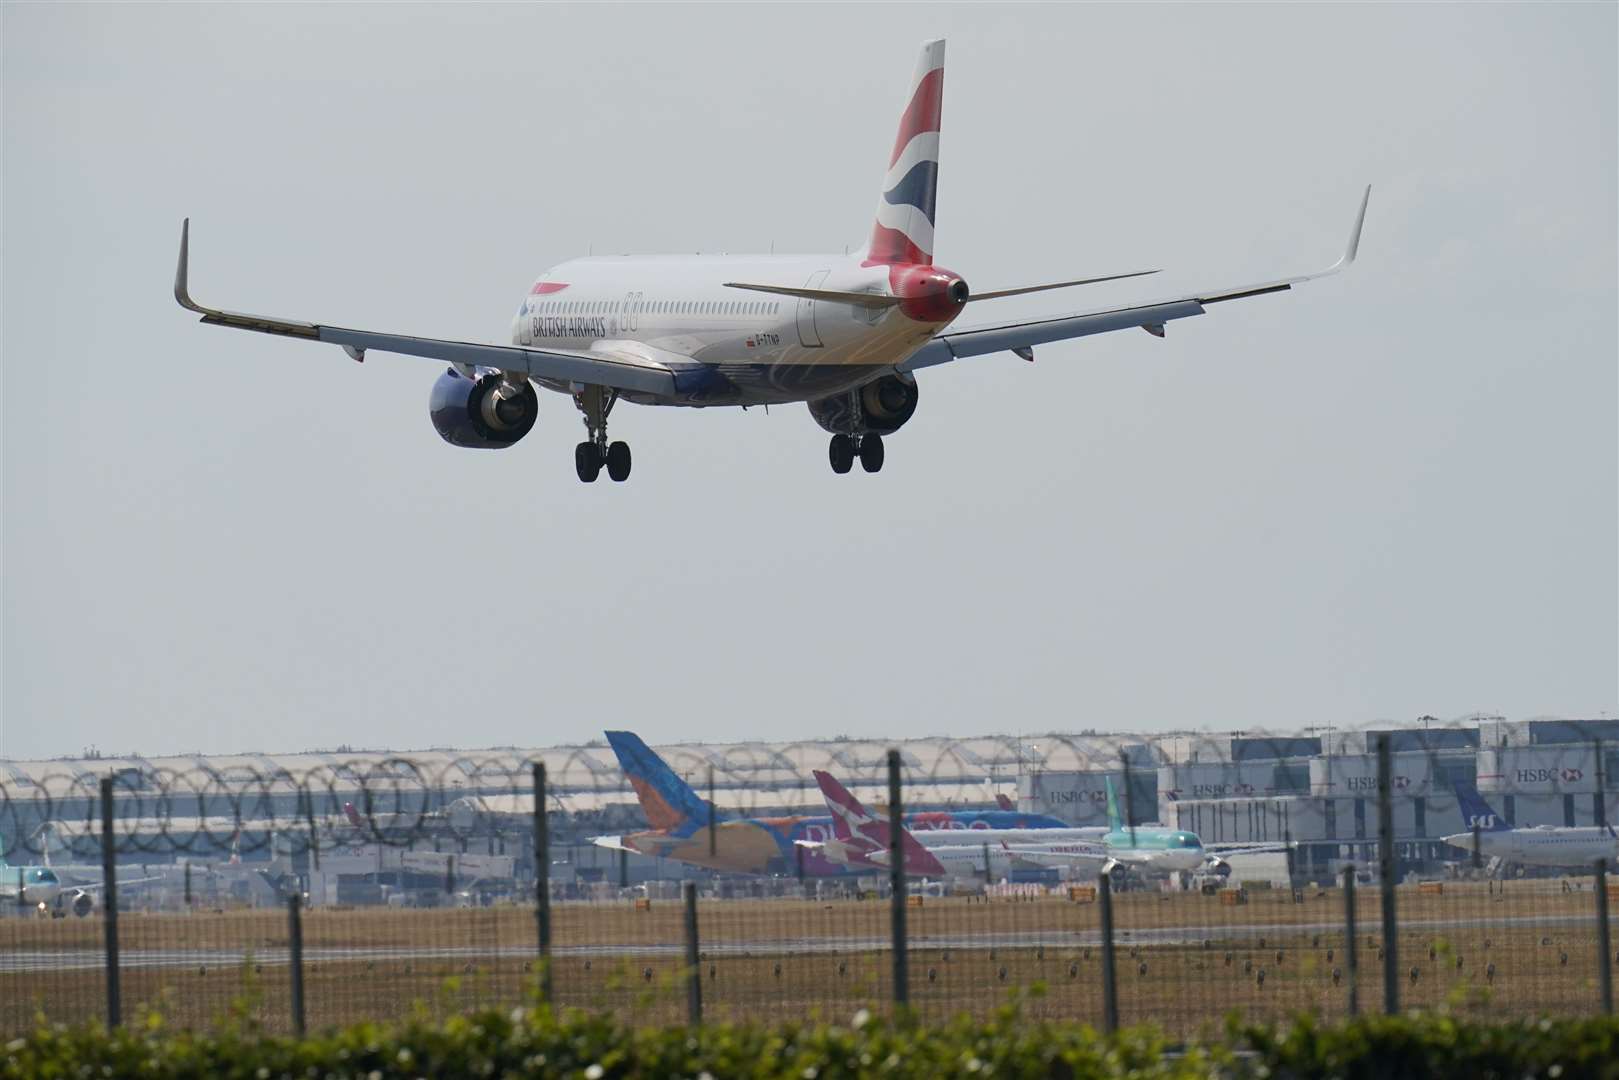 British Airways is one of the companies to confirm staff’s personal information was compromised (Jonathan Brady/PA)